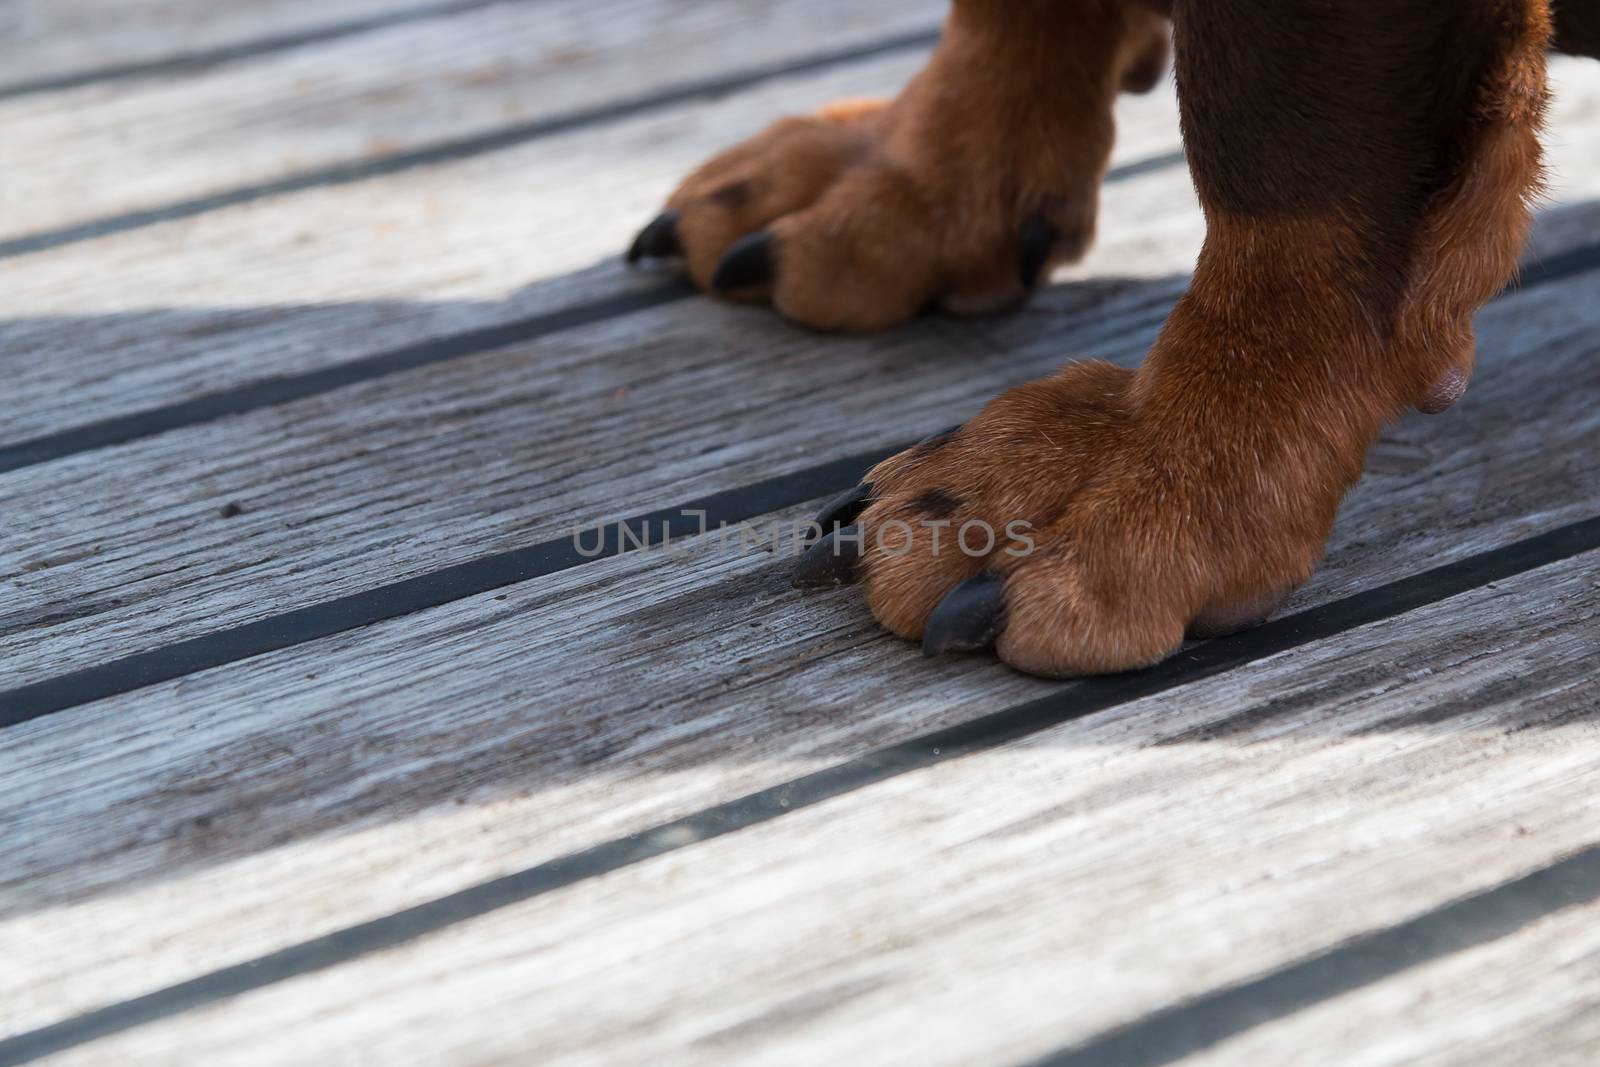 Paws of a big brown dog on the wooden floor